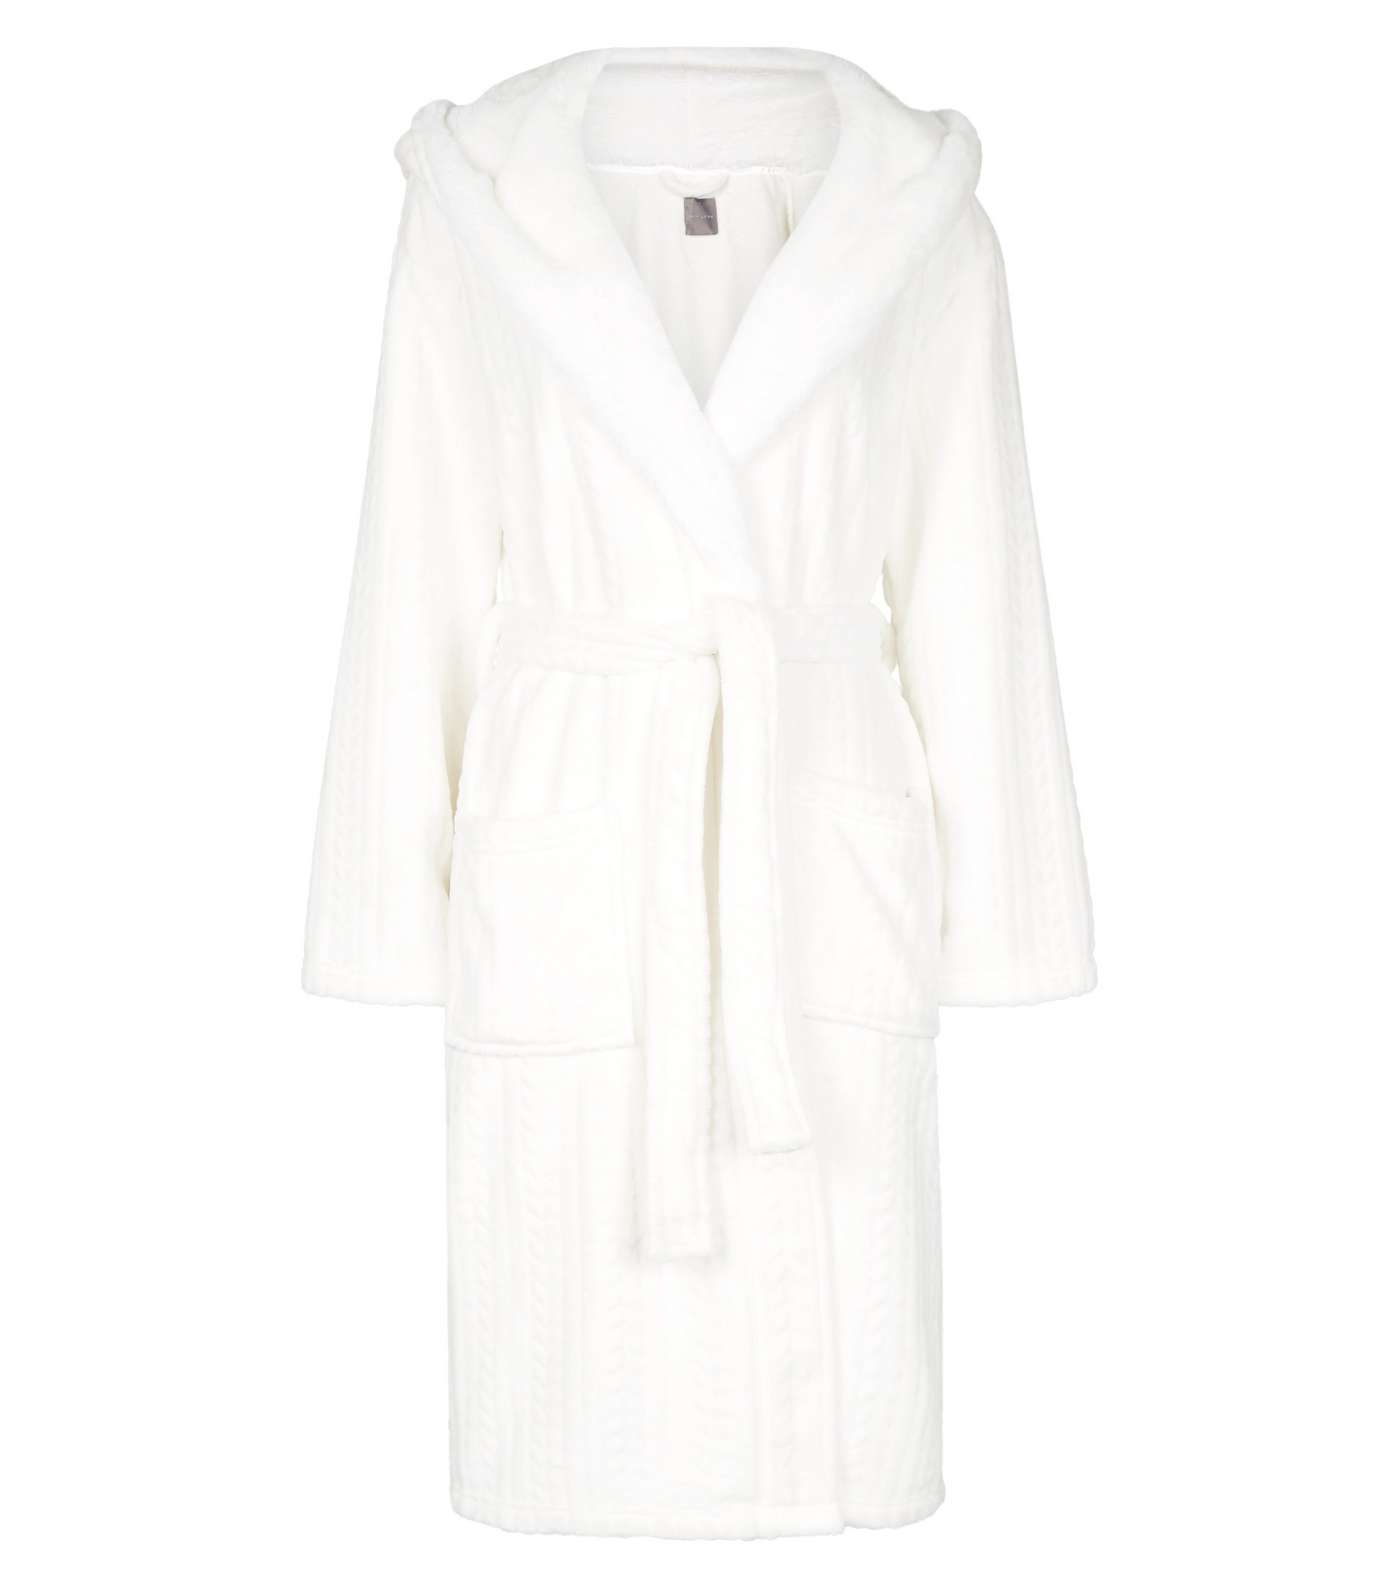 Off White Fluffy Hooded Dressing Gown Image 4